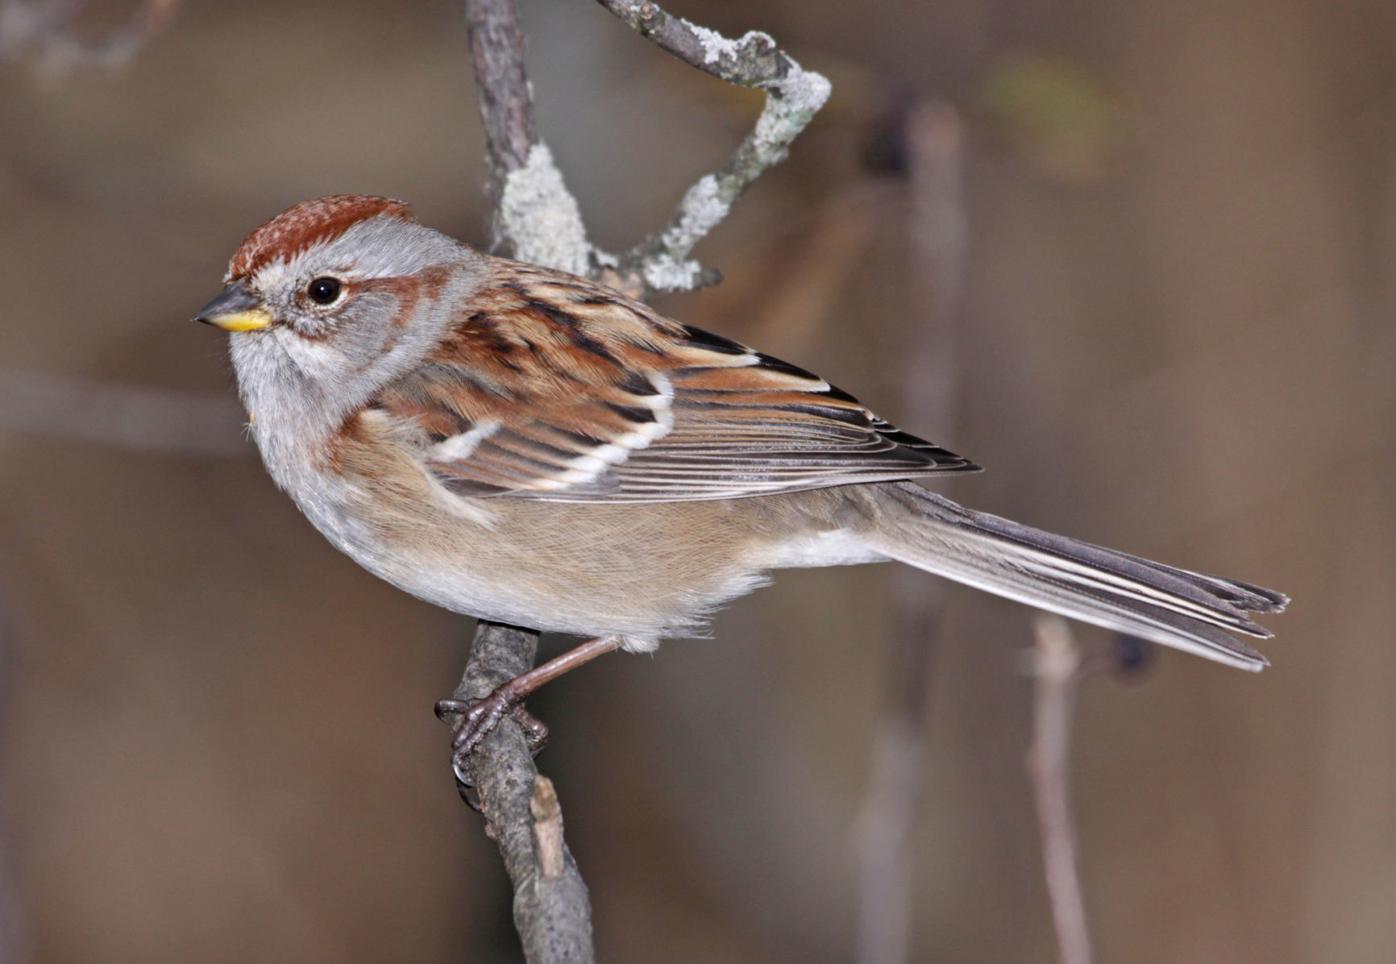 Rare sparrows make guest appearance at Penn